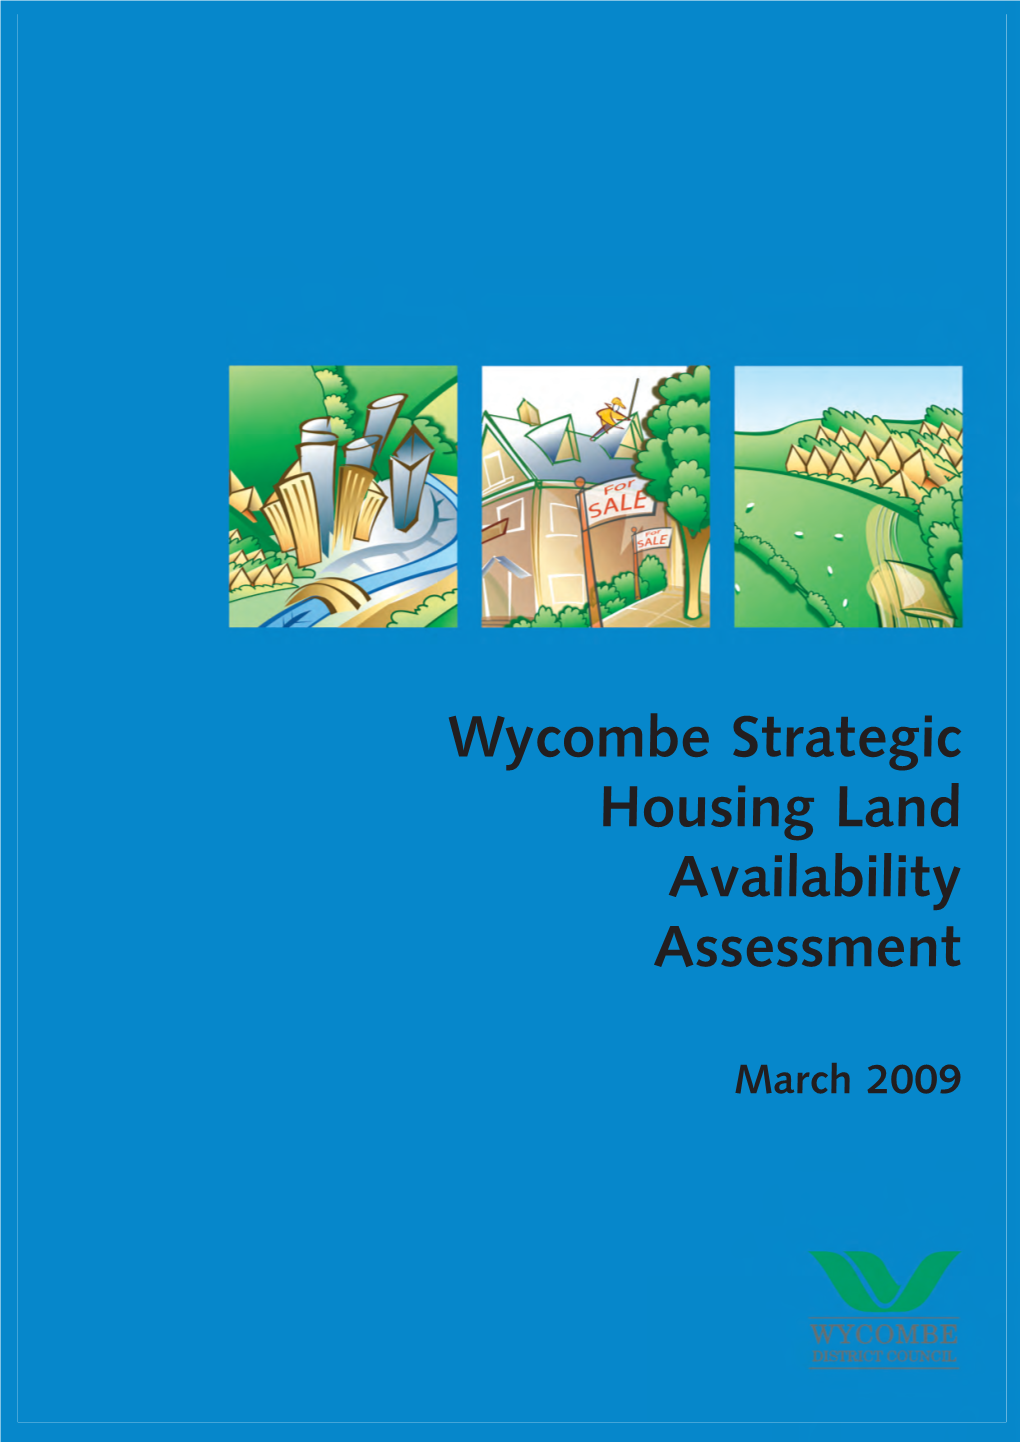 Wycombe Strategic Housing Land Availability Assessment